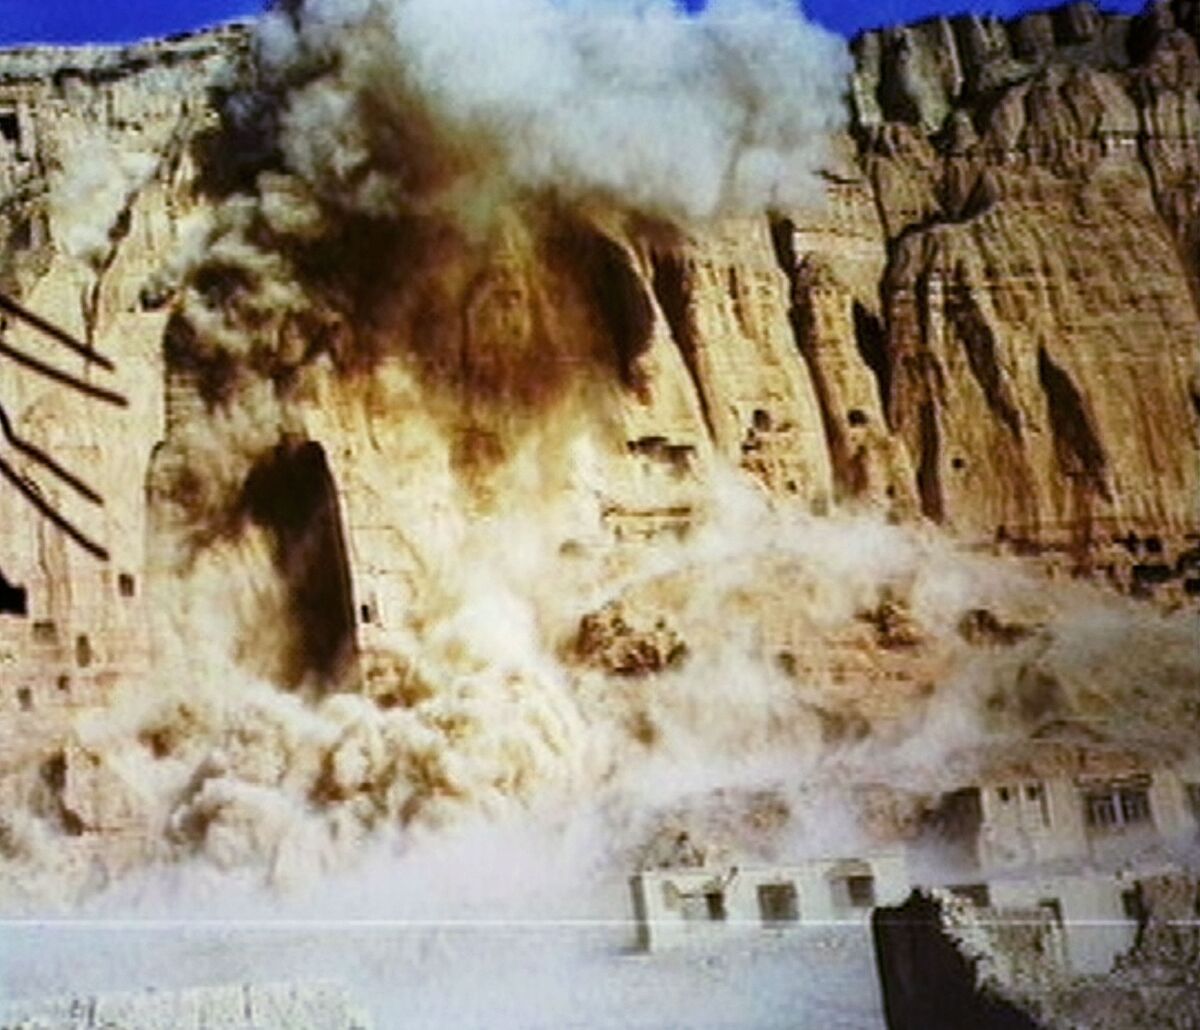 he giant Buddhas of Bamiyan are destroyed by the Taliban government on March 12, 2001 in Bamiyan, Afghanistan. 